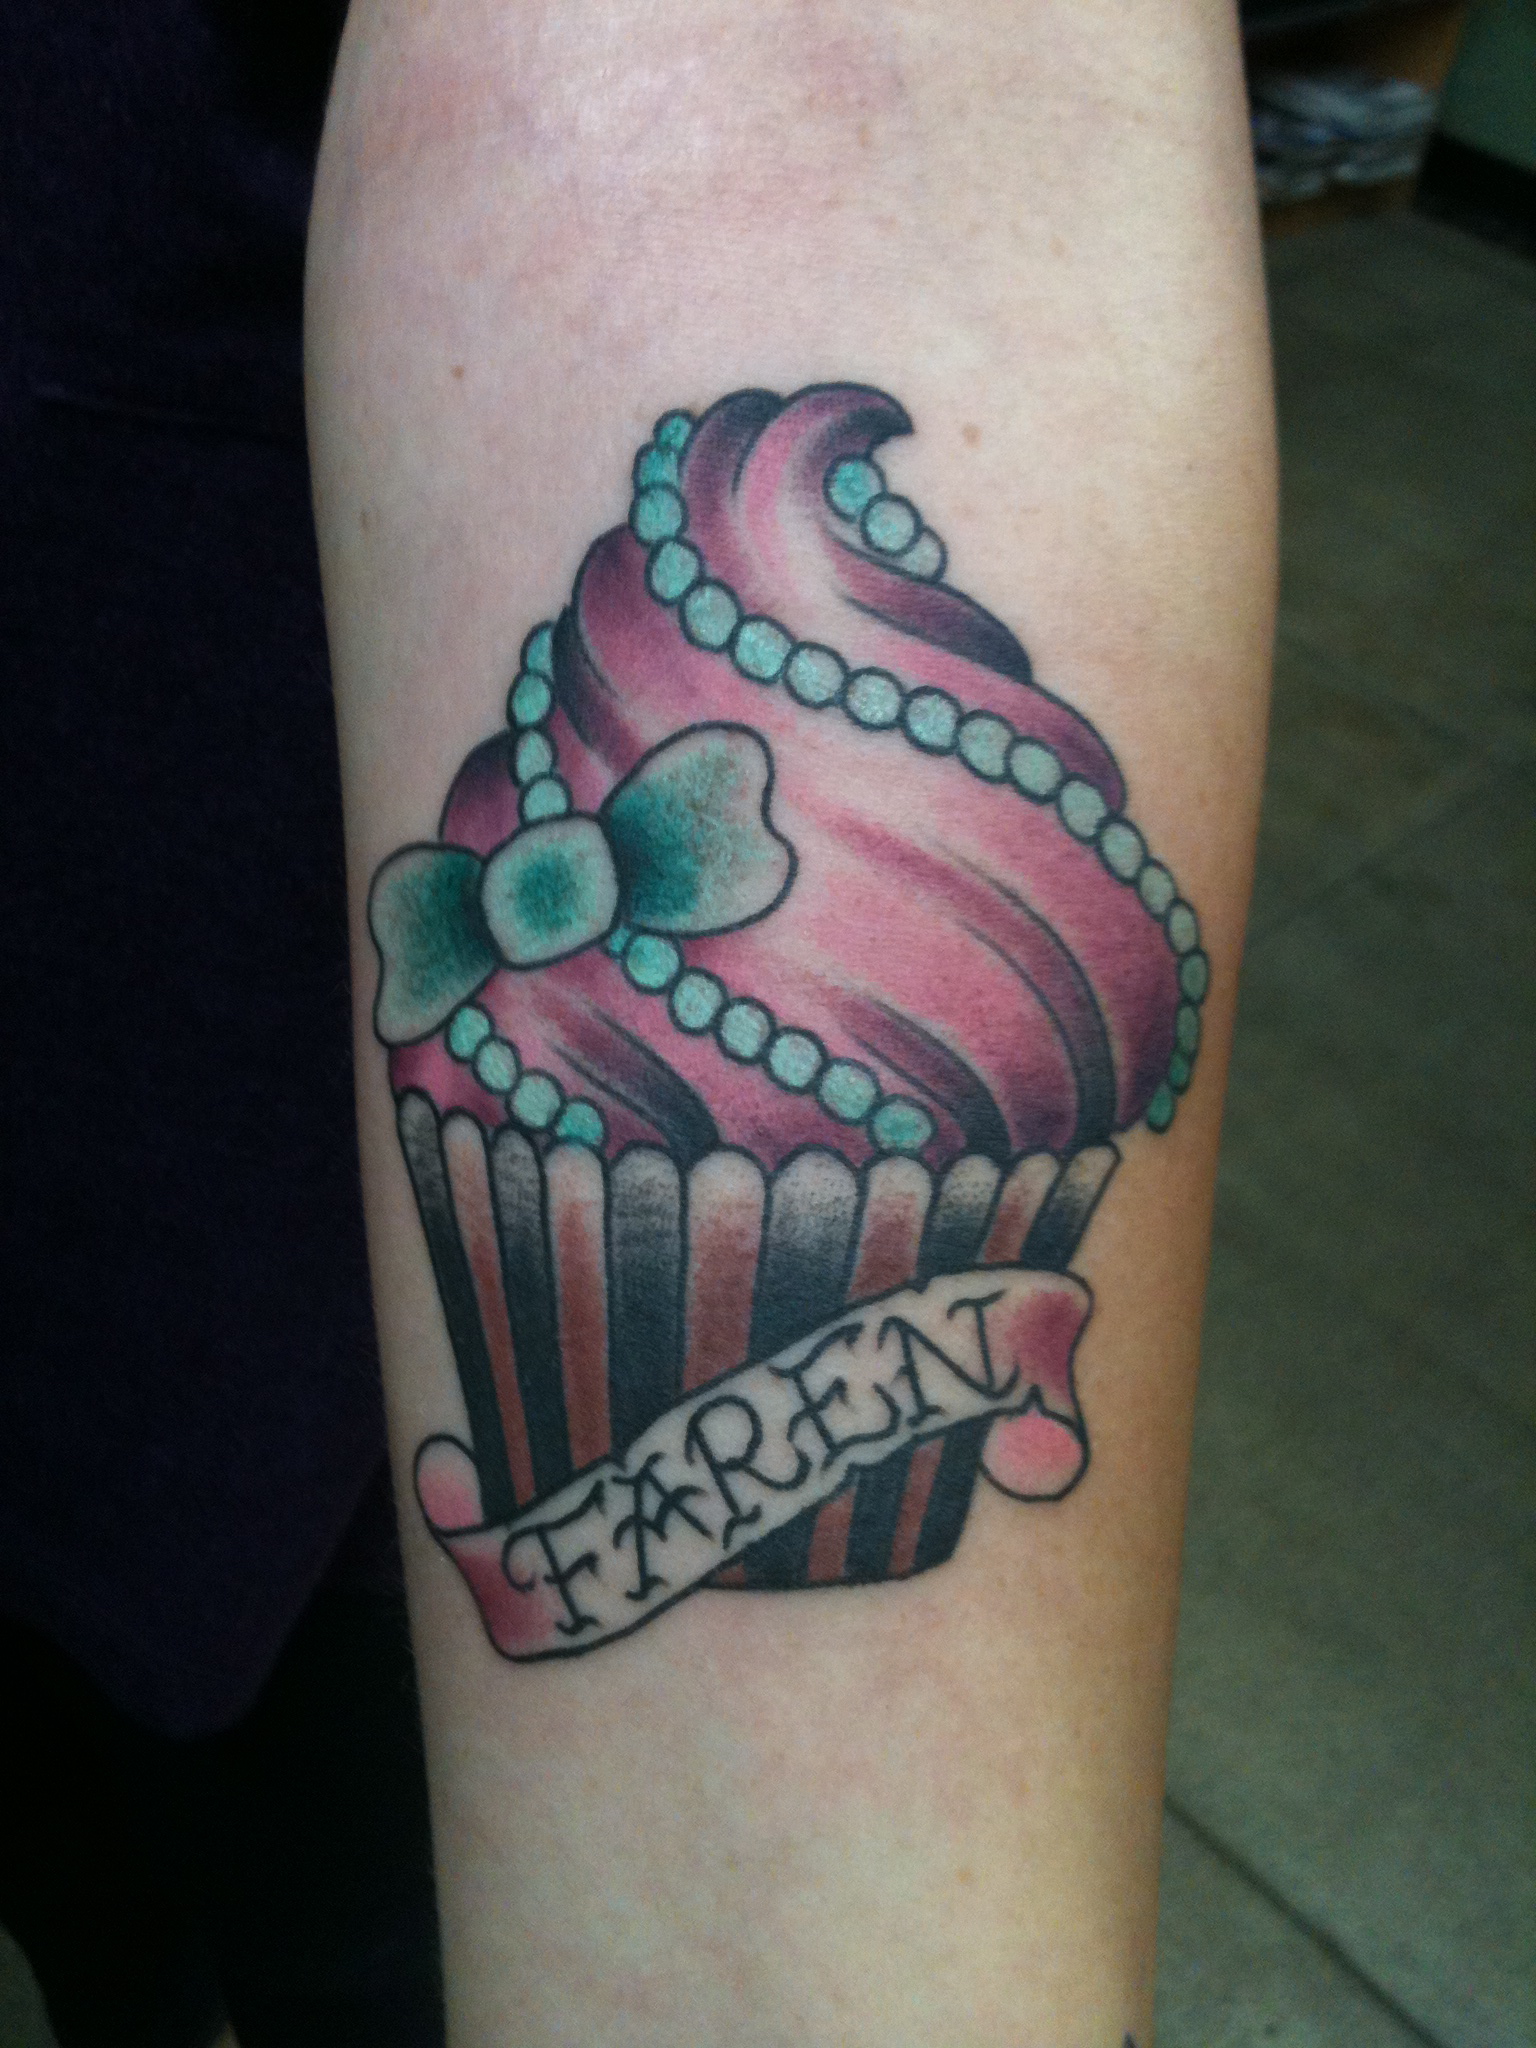 Cupcake Tattoos Designs, Ideas and Meaning | Tattoos For You